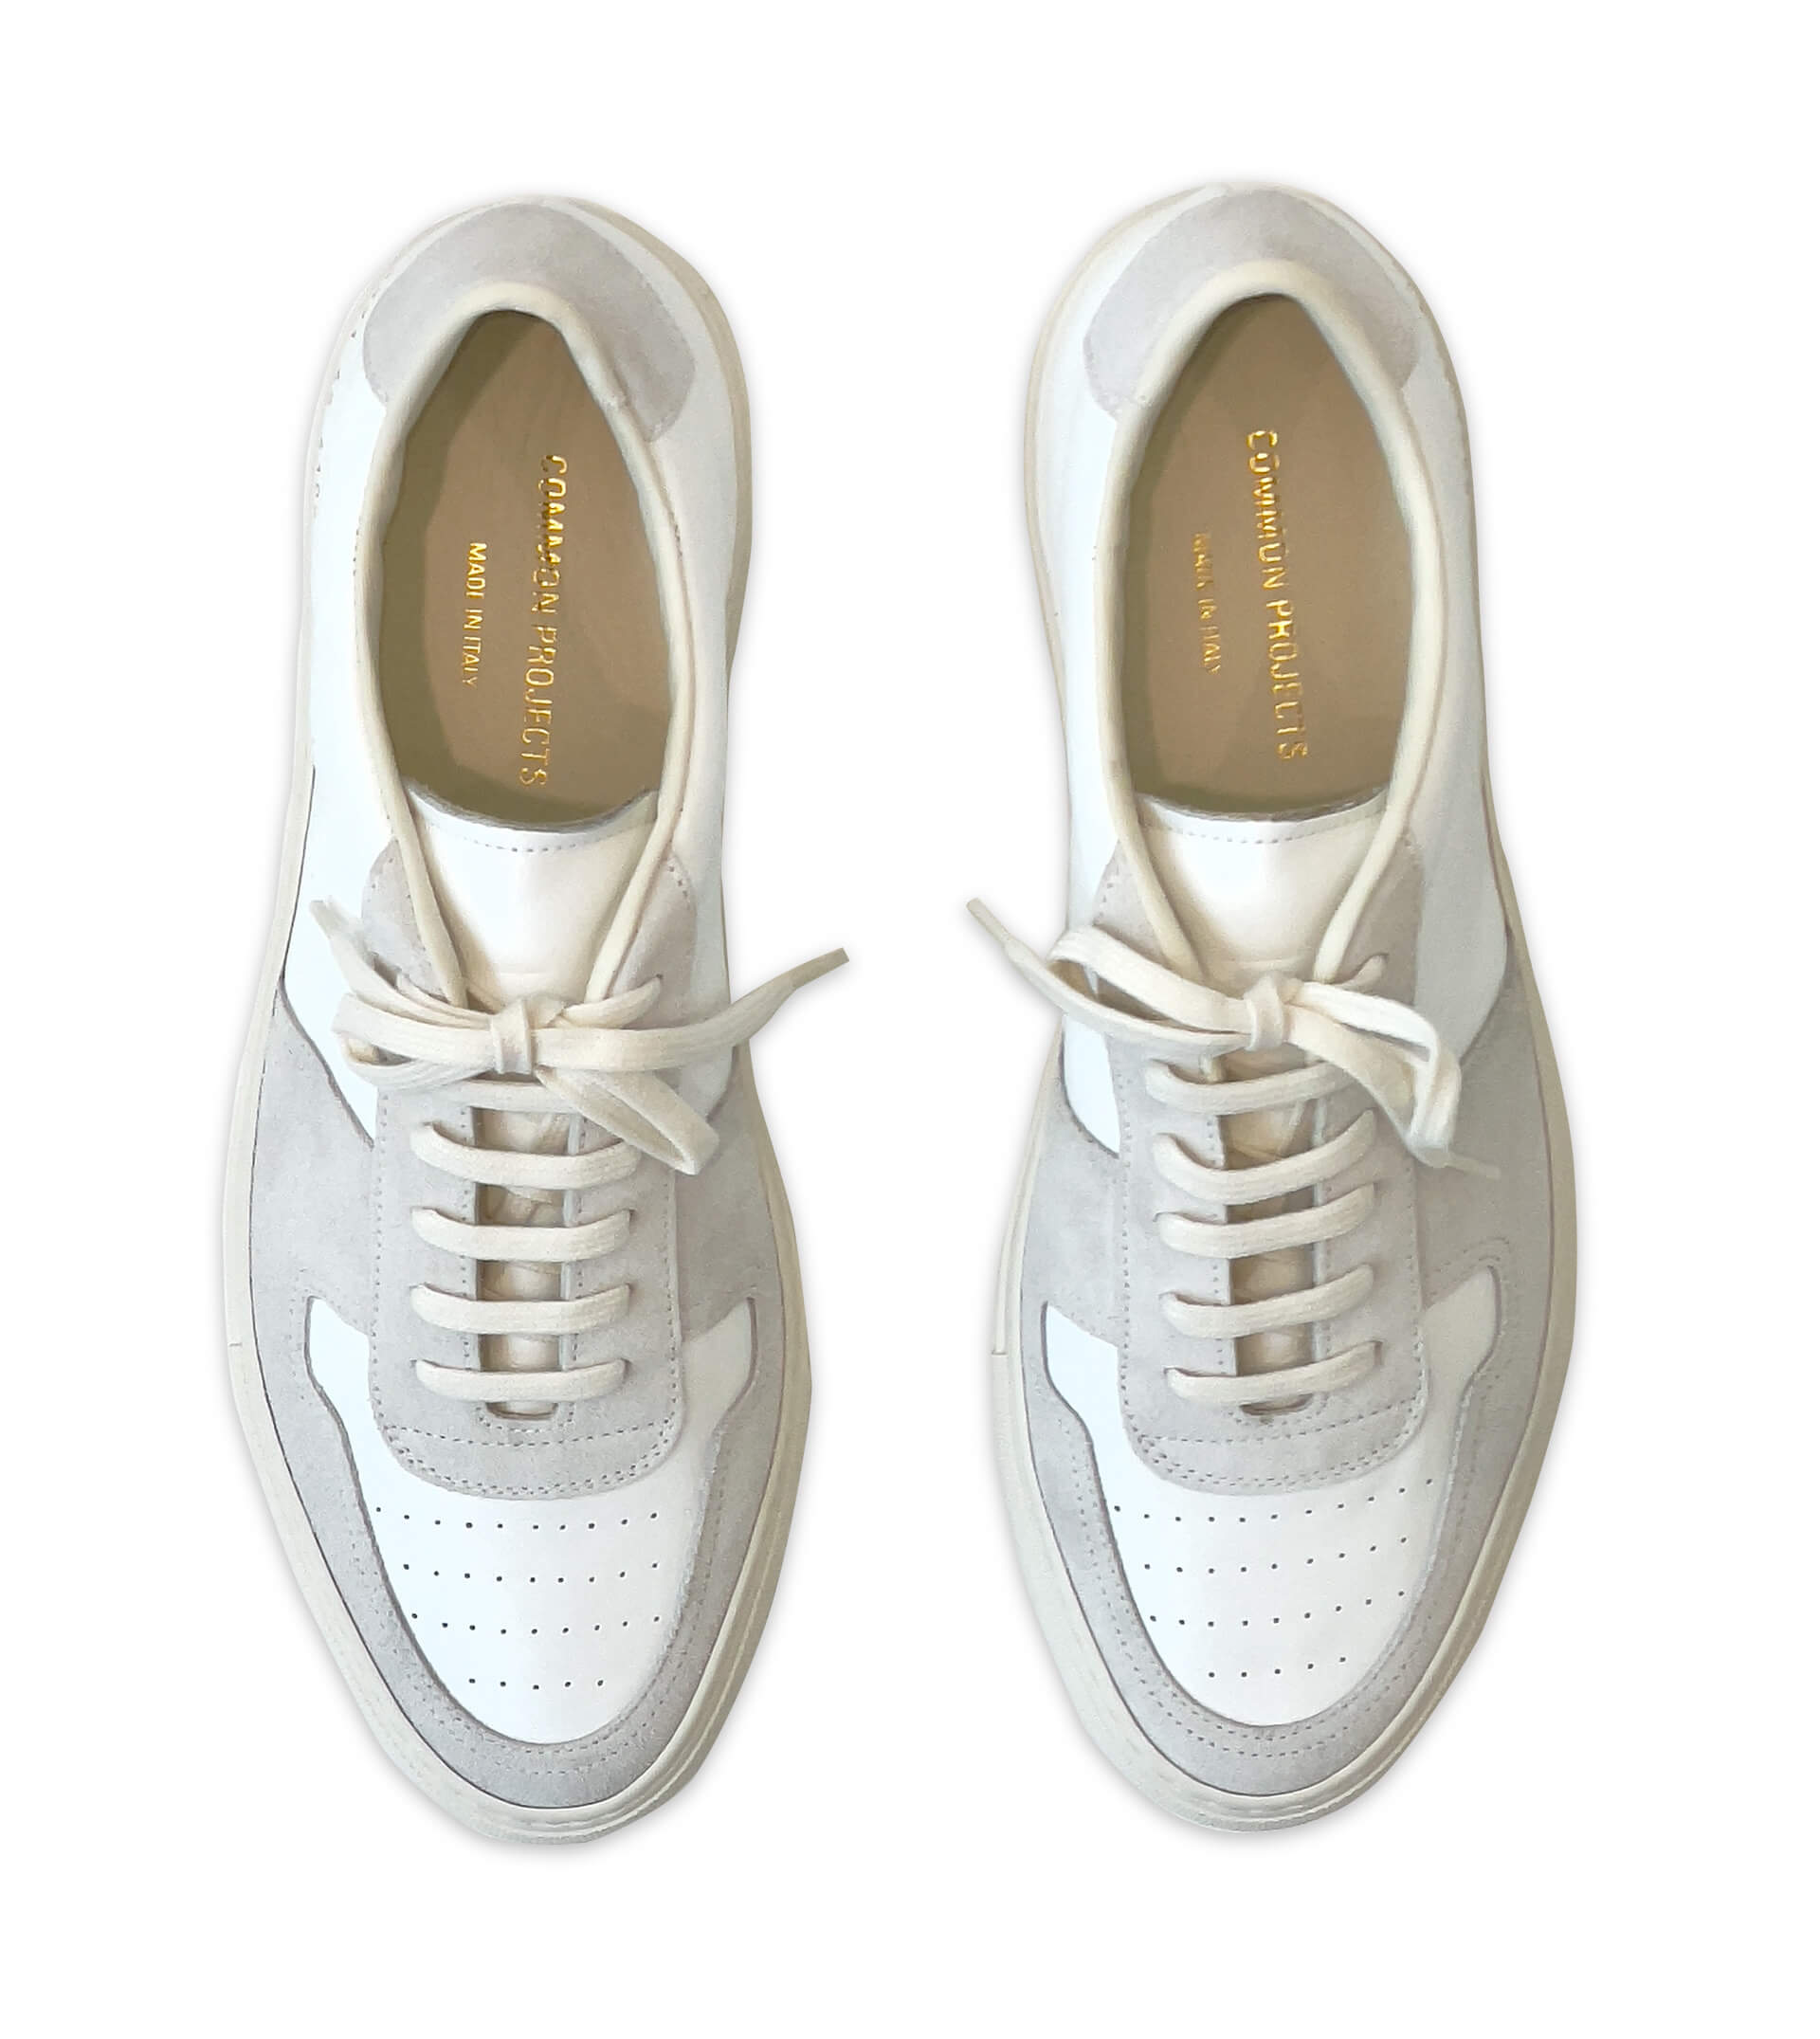 COMMON PROJECTS B-Ball Summer Duo Material +Colors